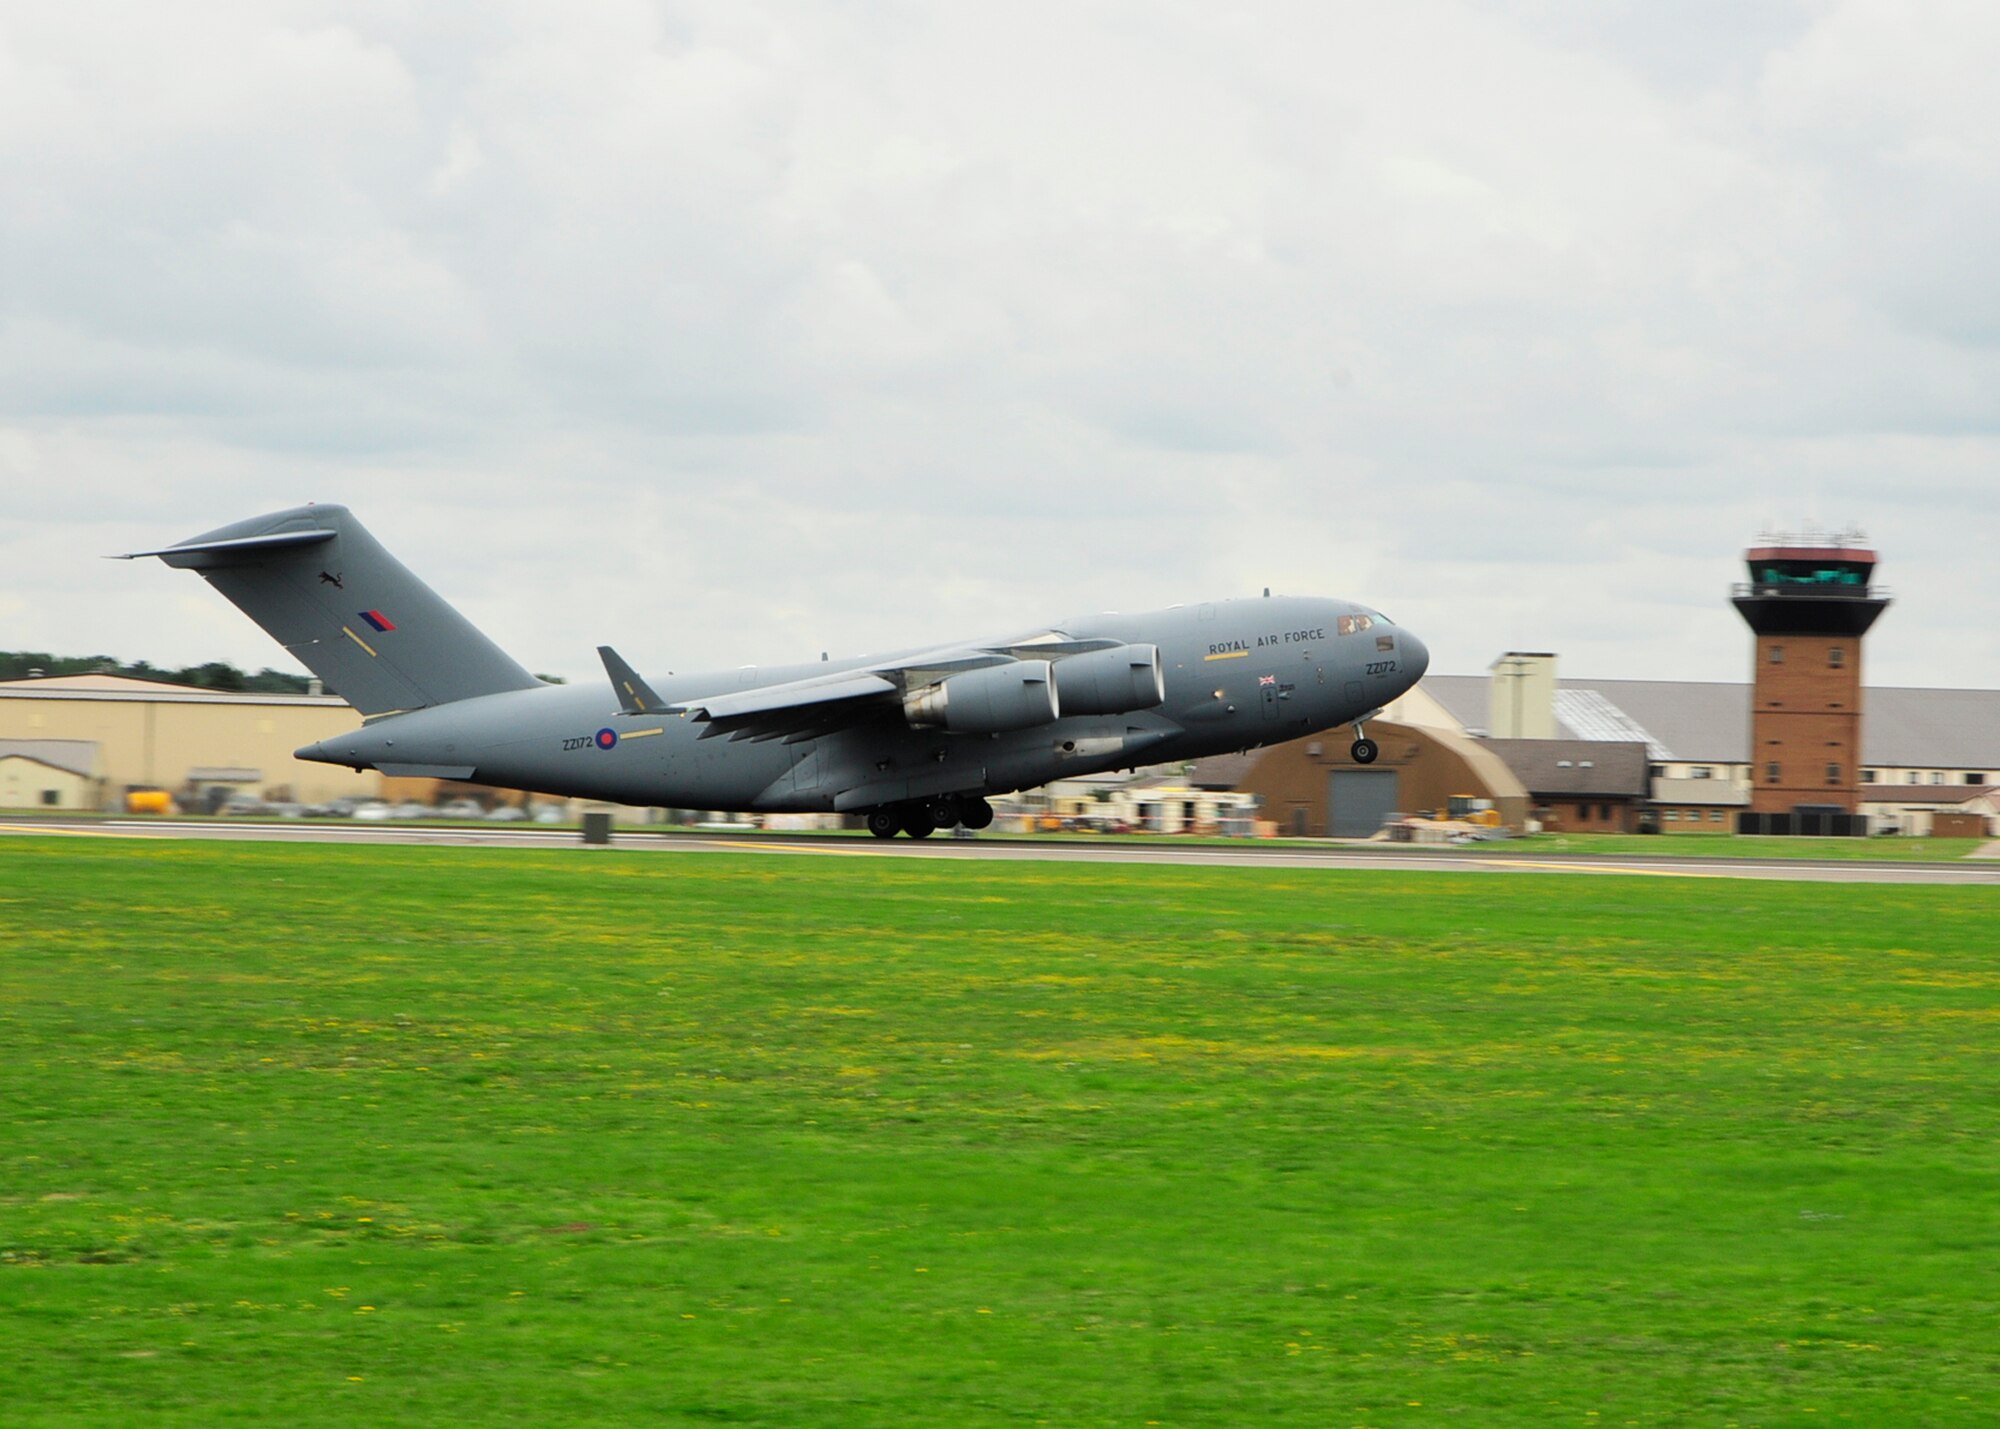 A Royal Air Force C-17 Globemaster takes off from RAF Lakenheath, England, Aug. 25. The C-17 left carrying U.S. Air Force equipment to support Operation Icelandic Air Policing. (U.S. Air Force photo/Airman 1st Class Tiffany Deuel)